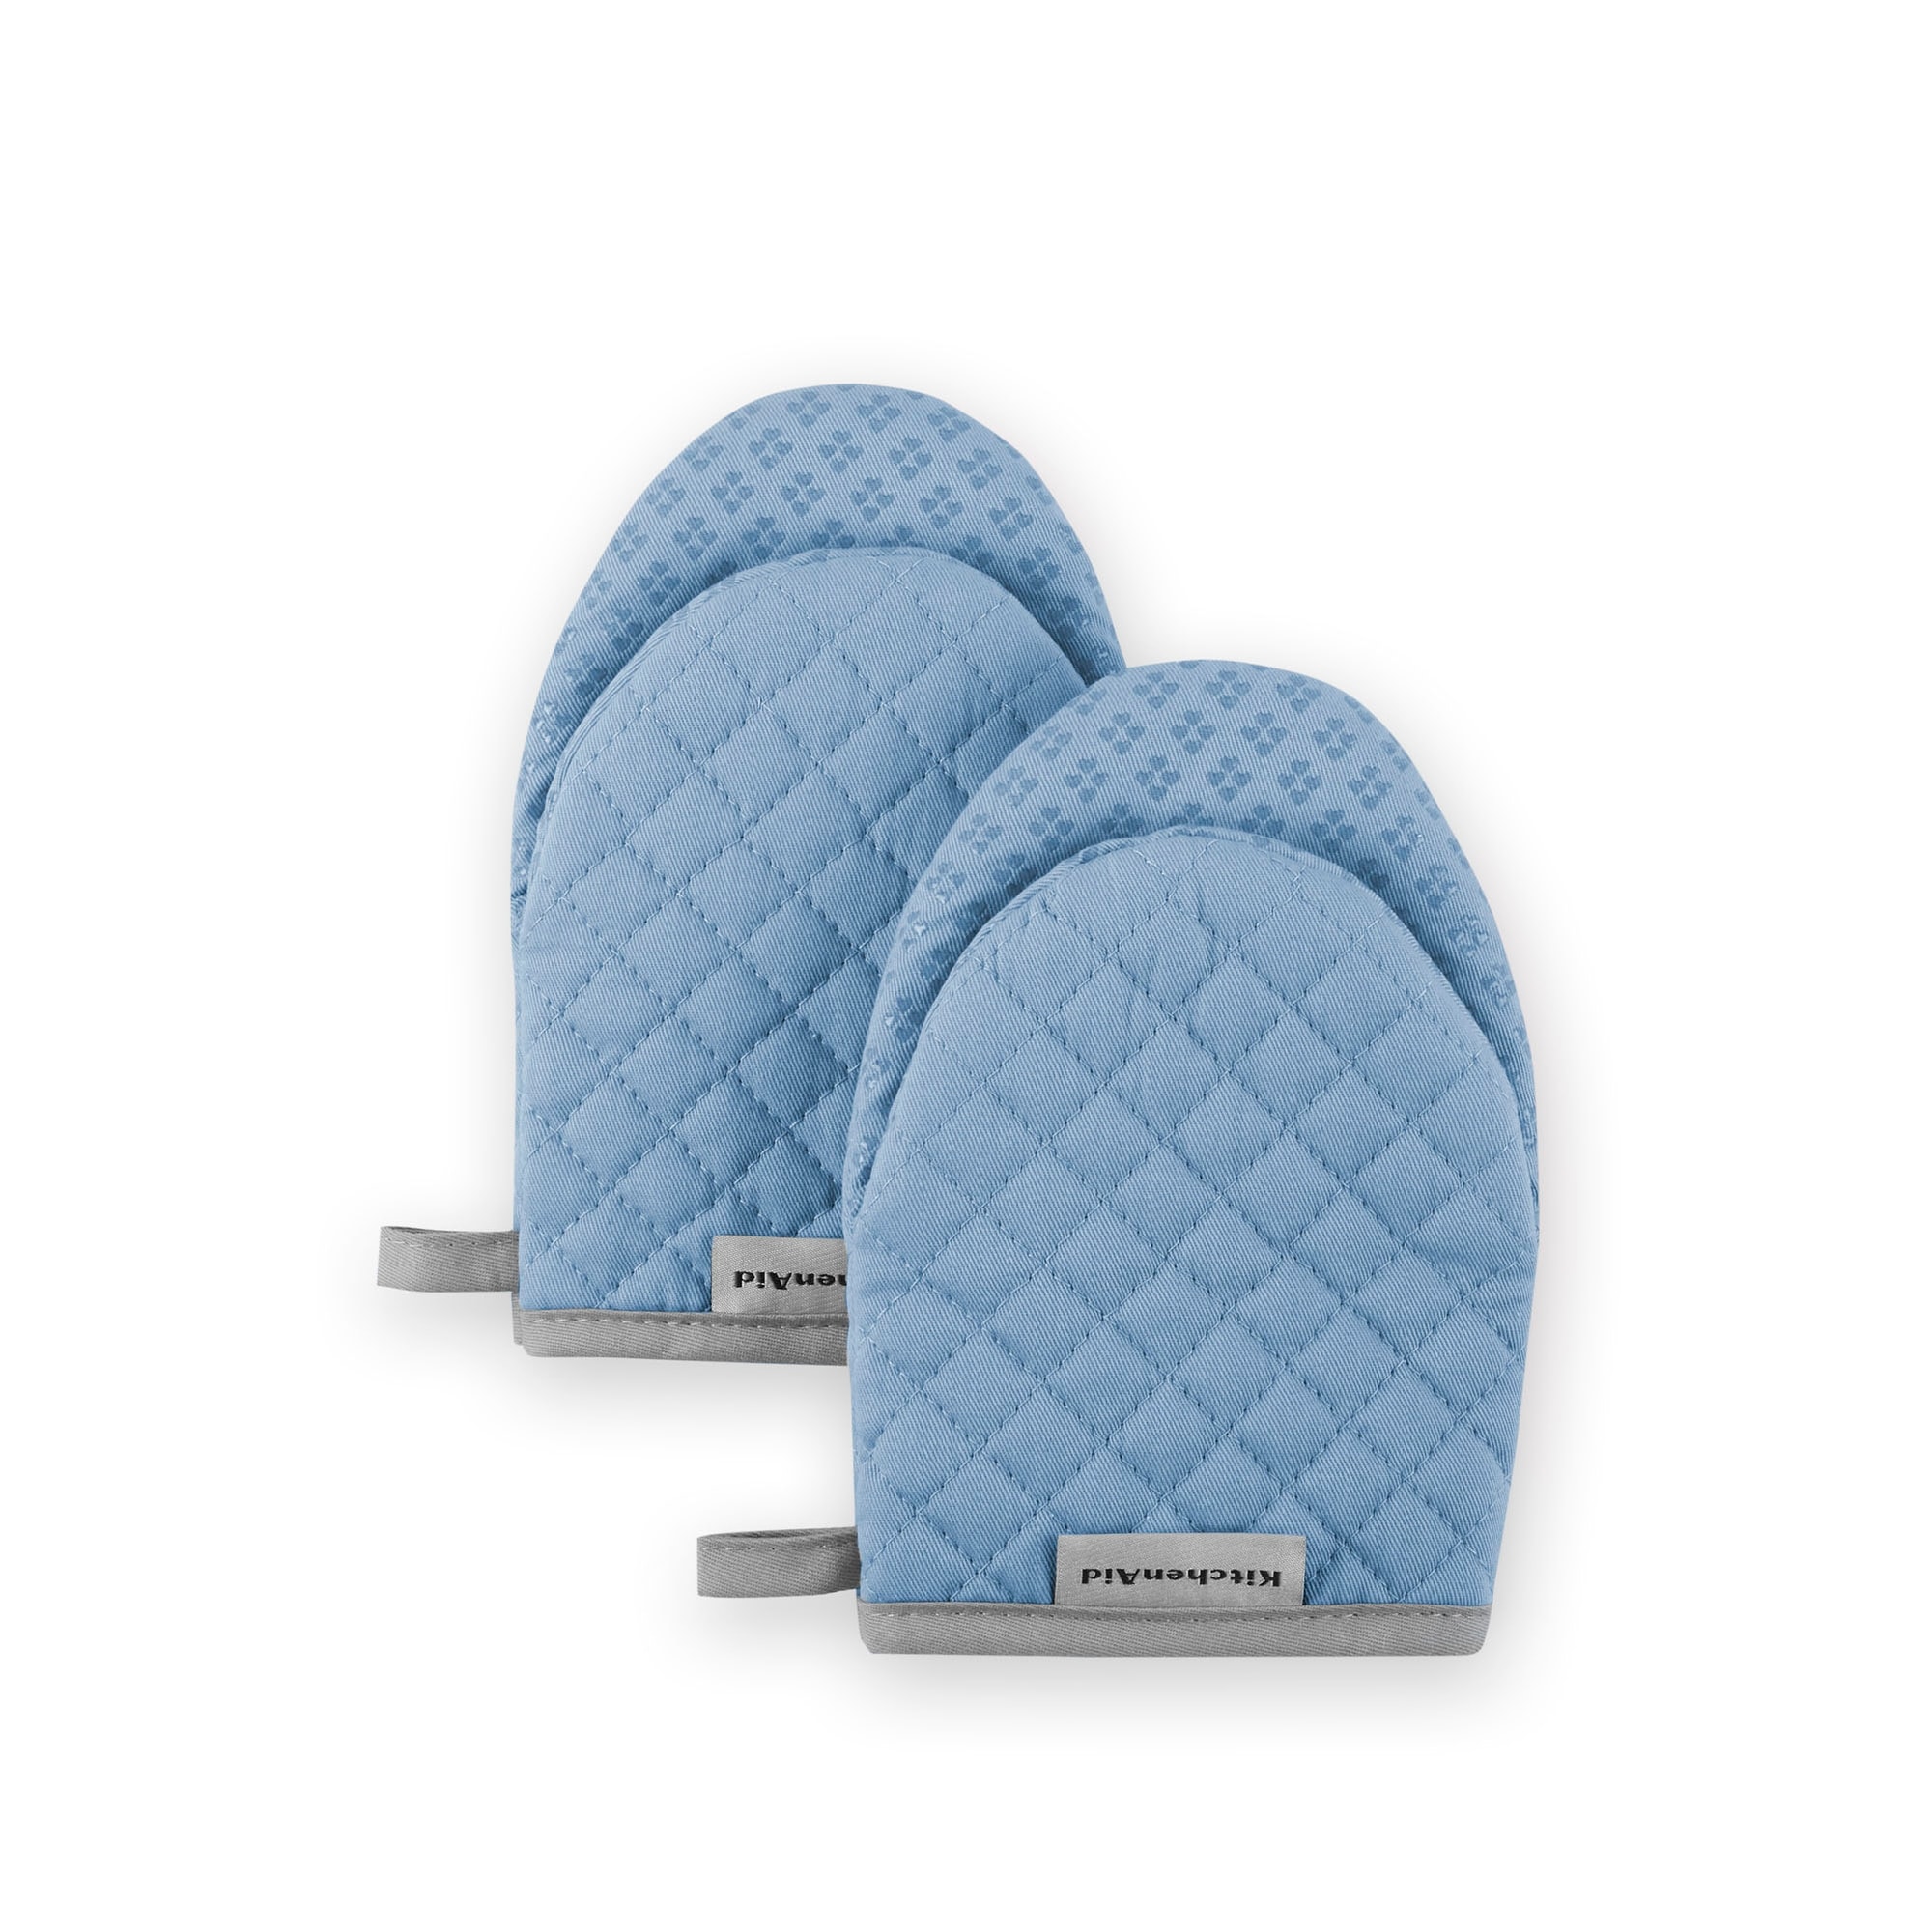 KitchenAid Ribbed Soft Silicone Oven Mitt, Set of 2 - Blue Willow